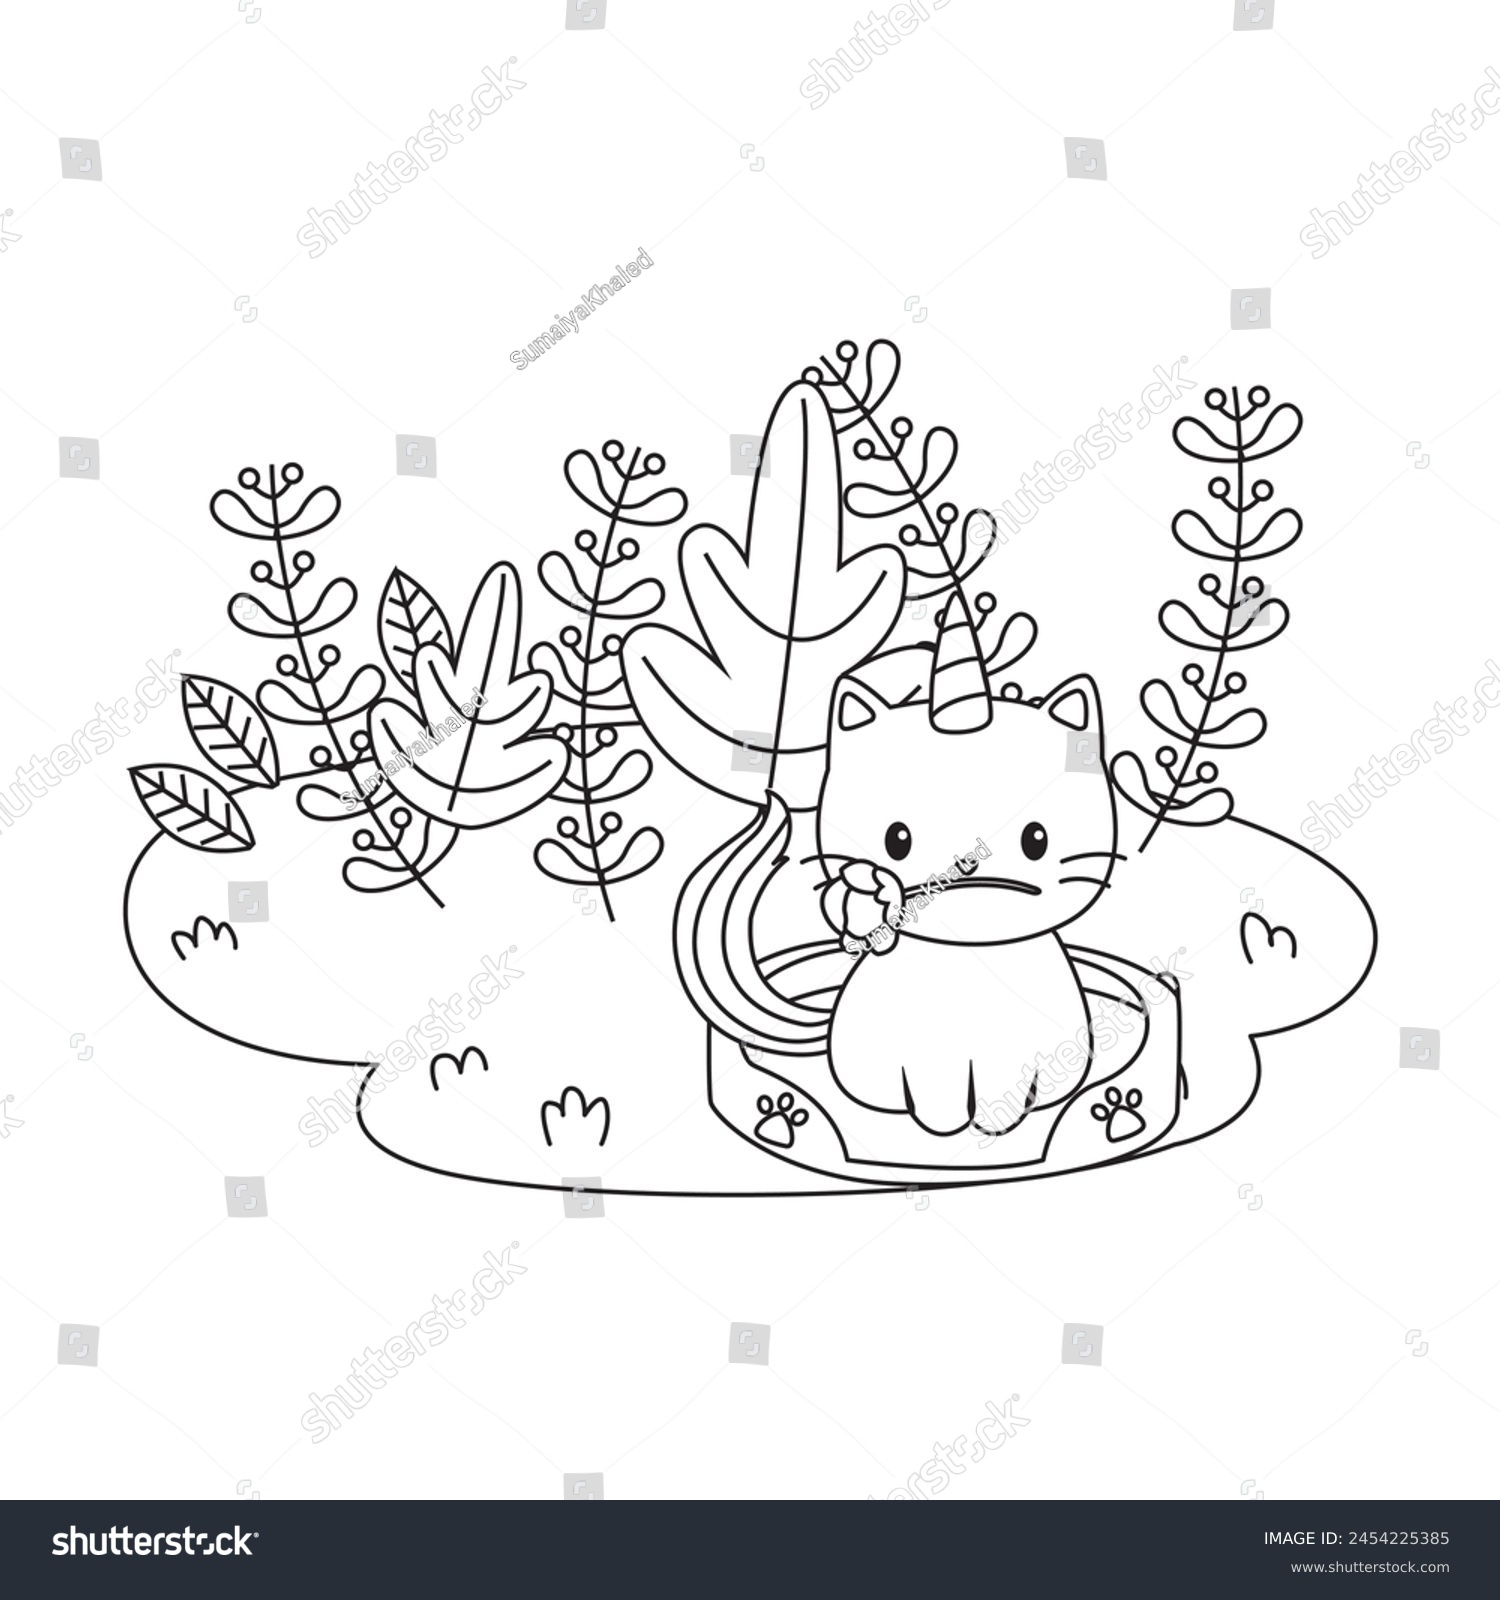 SVG of HD printable caticorn and cat unicorn or anime cat coloring pages for children kids and adults. Children coloring pages, caticorn coloring pages, learning for kids. Cat Vector
 svg